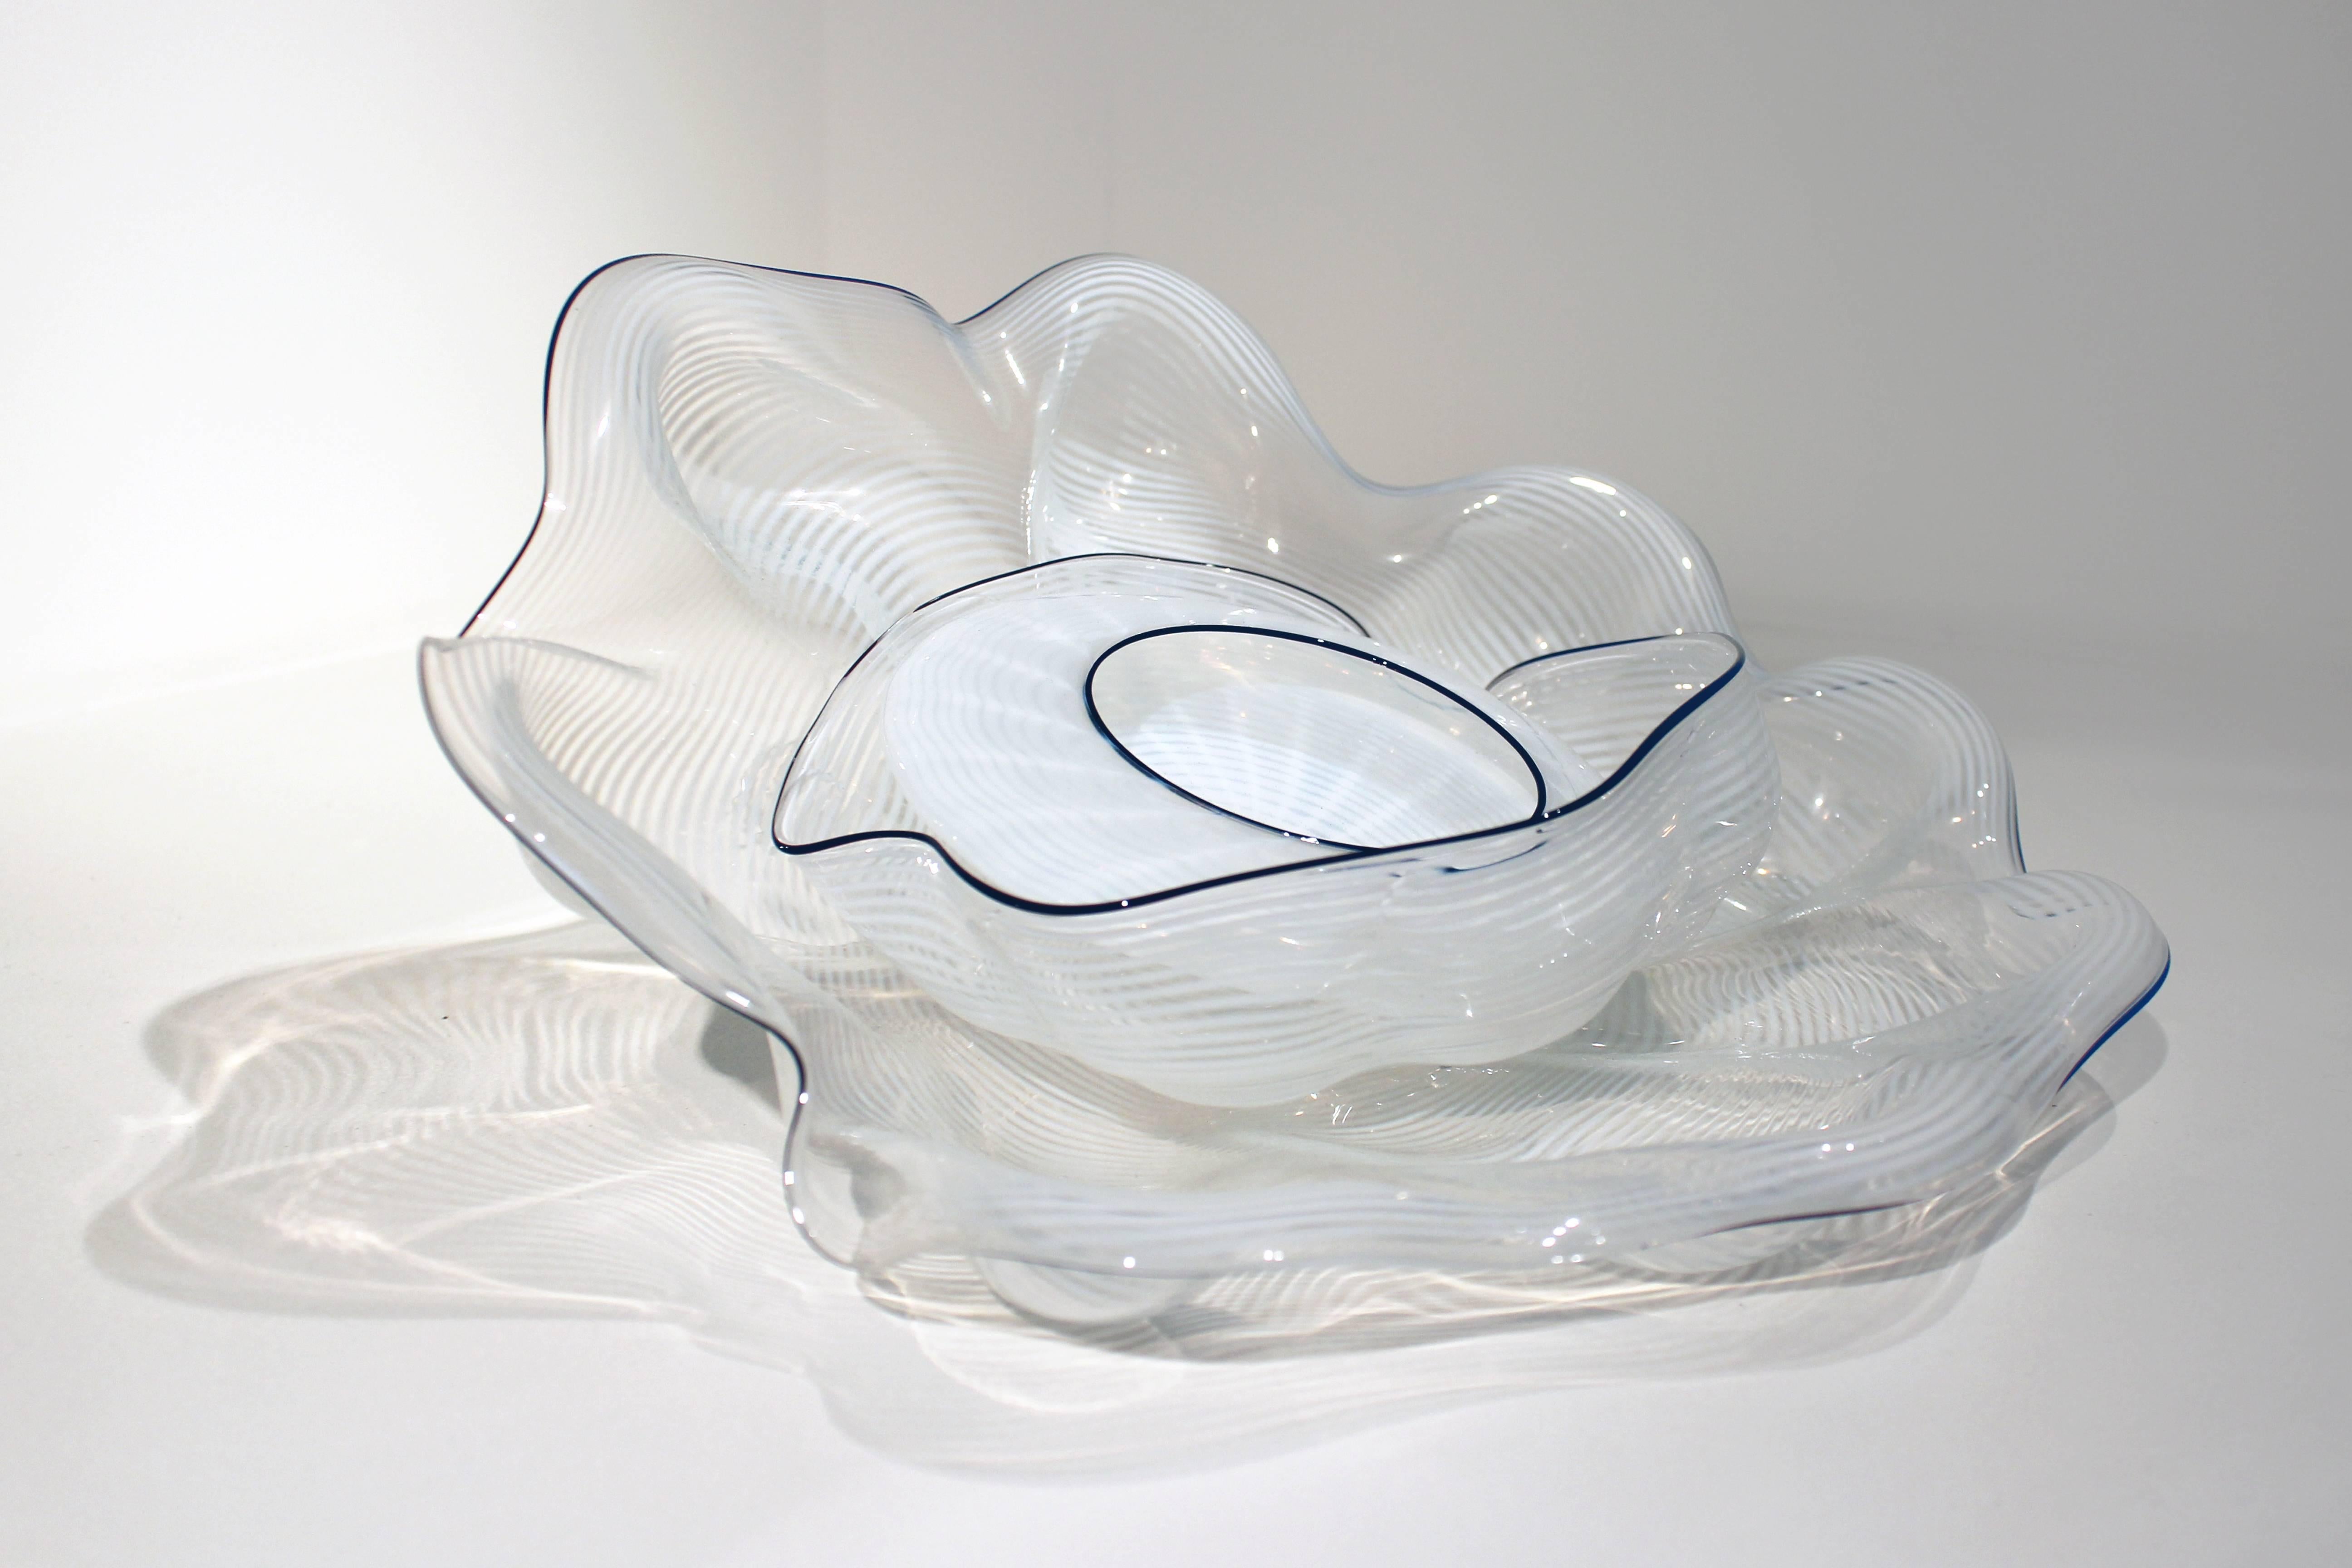 White Seaform with Black Lip Wraps - Sculpture by Dale Chihuly